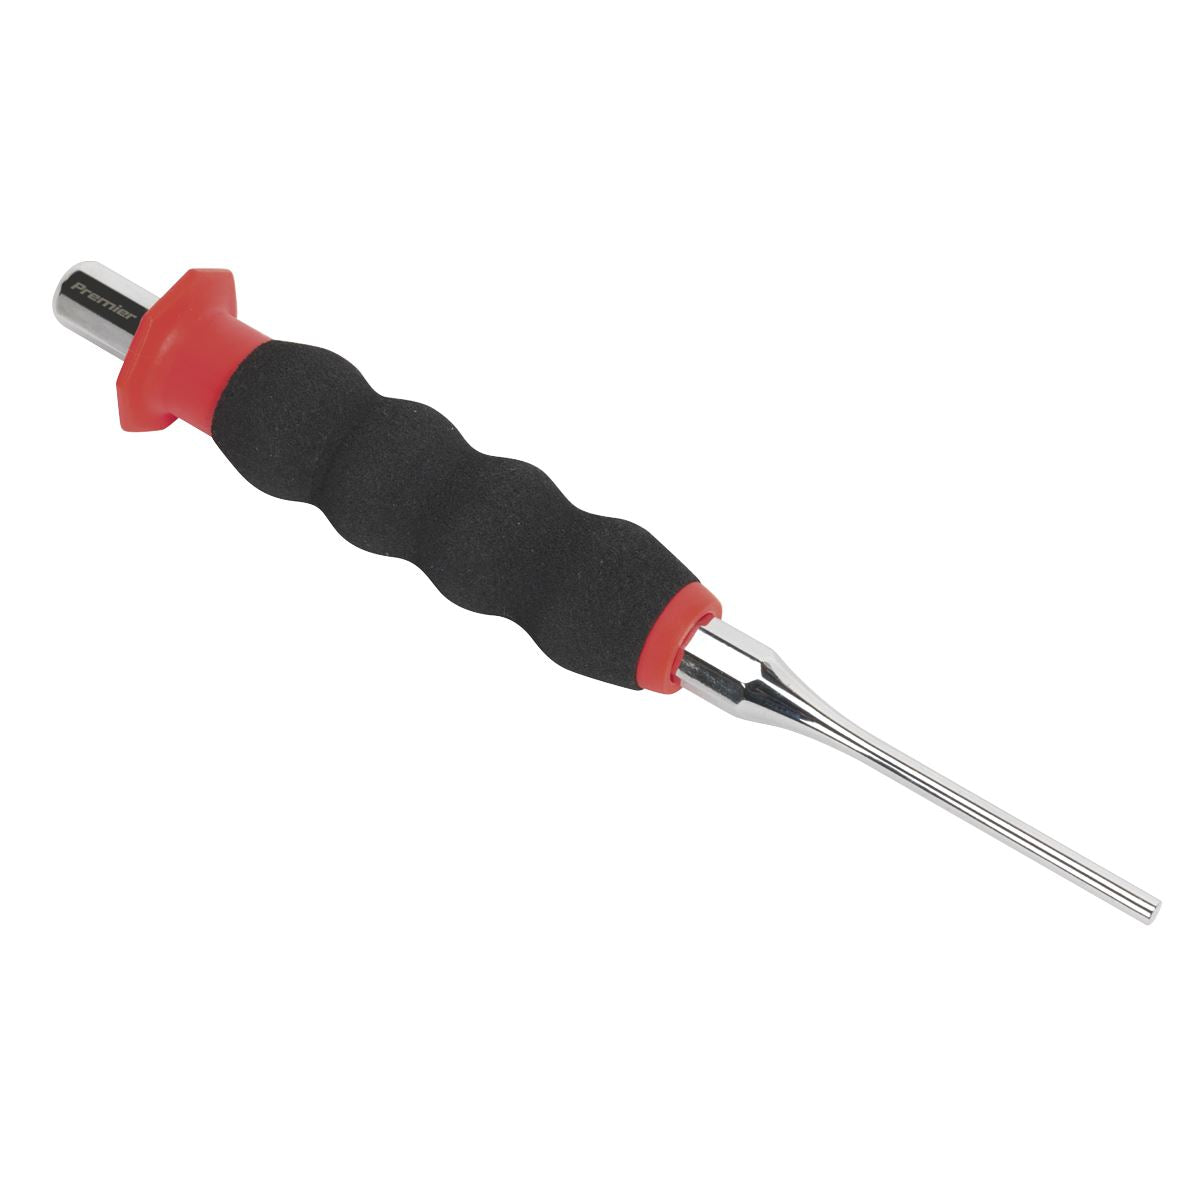 Sealey Premier Sheathed Parallel Pin Punch Ø4mm